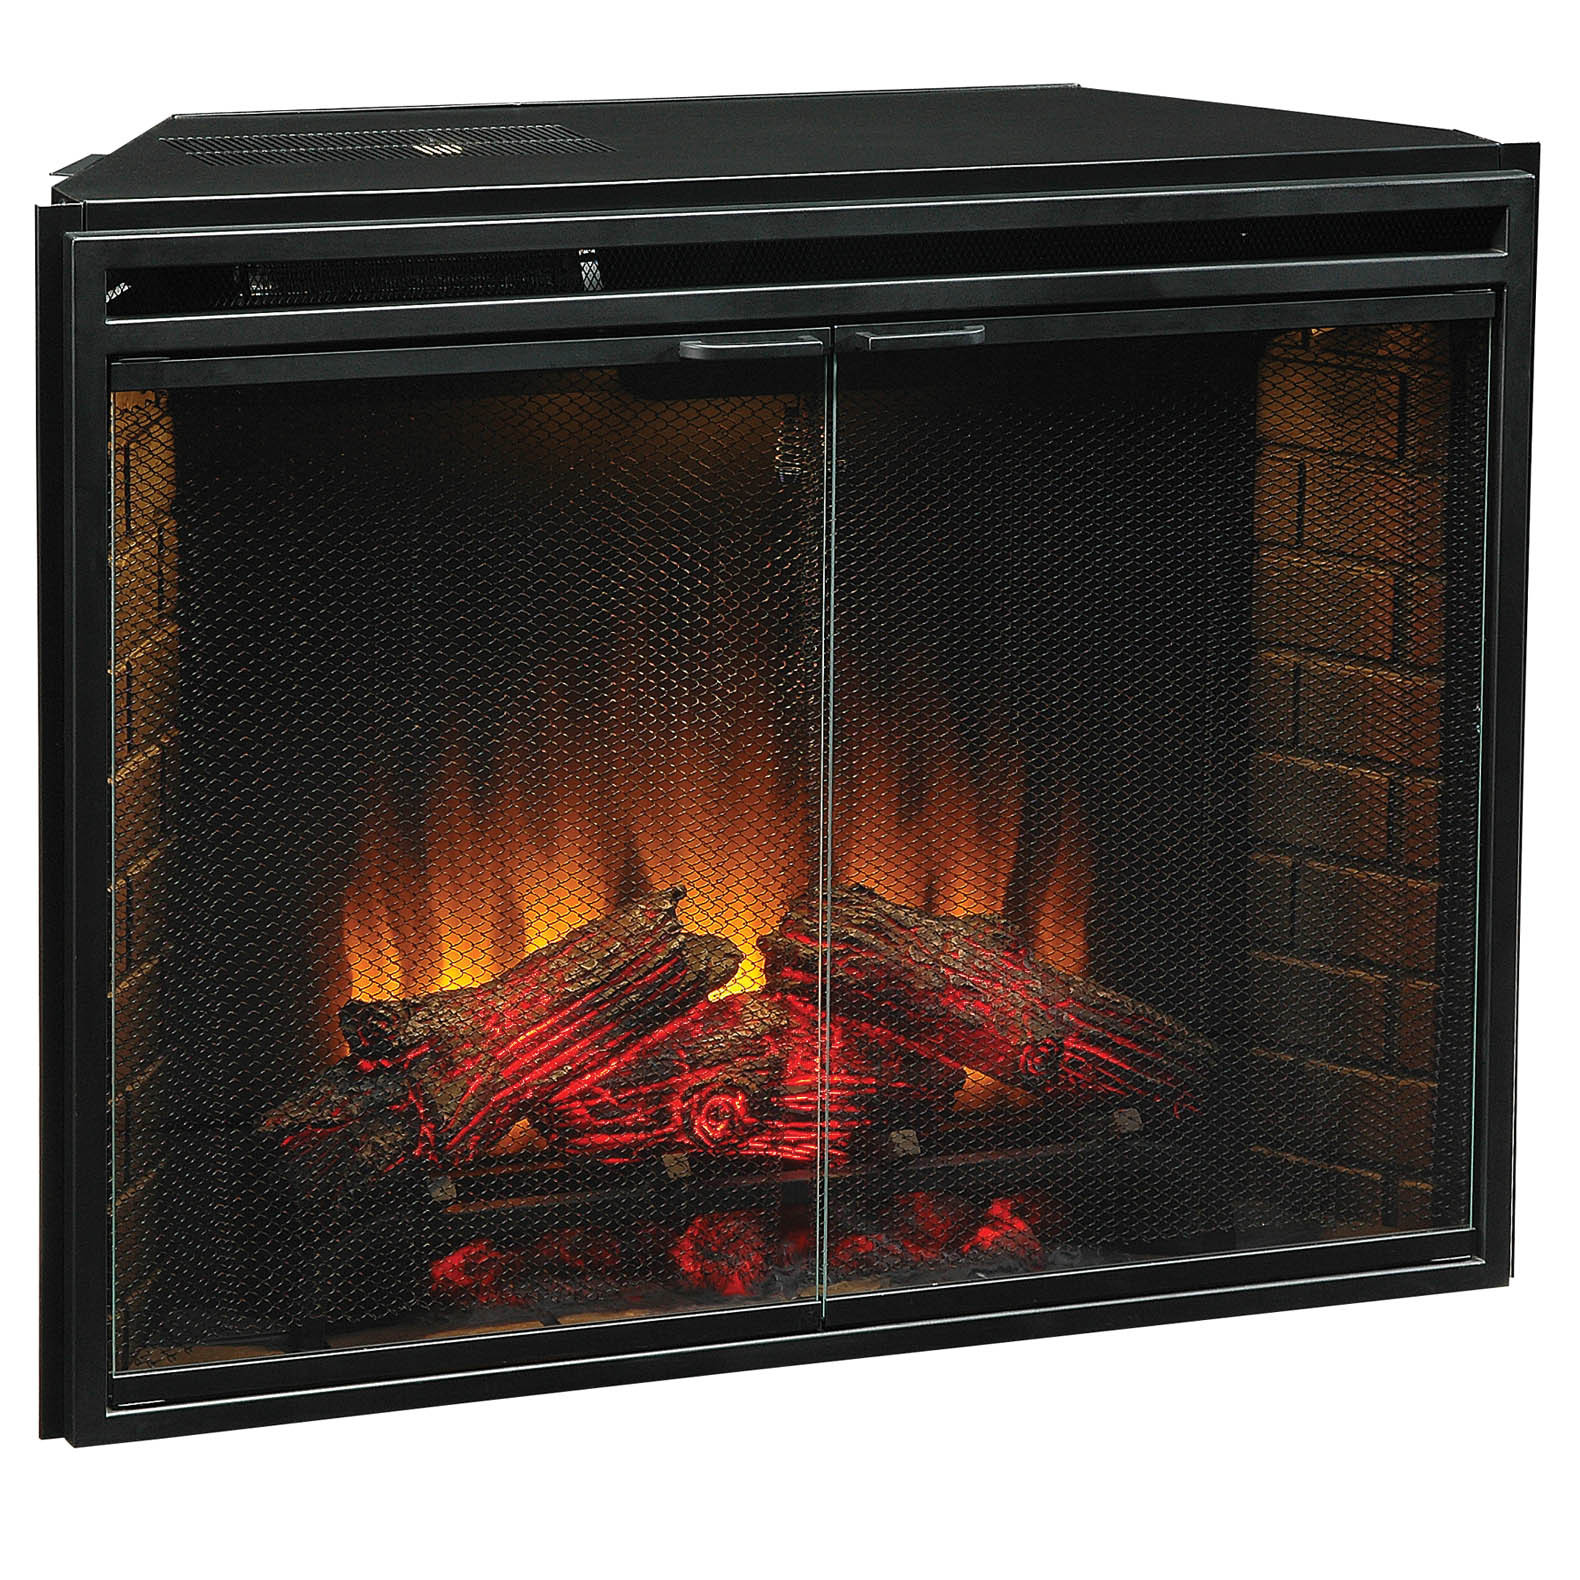 Electric Logs Fireplace Inserts
 Electric Fireplace Log Inserts With Heaters